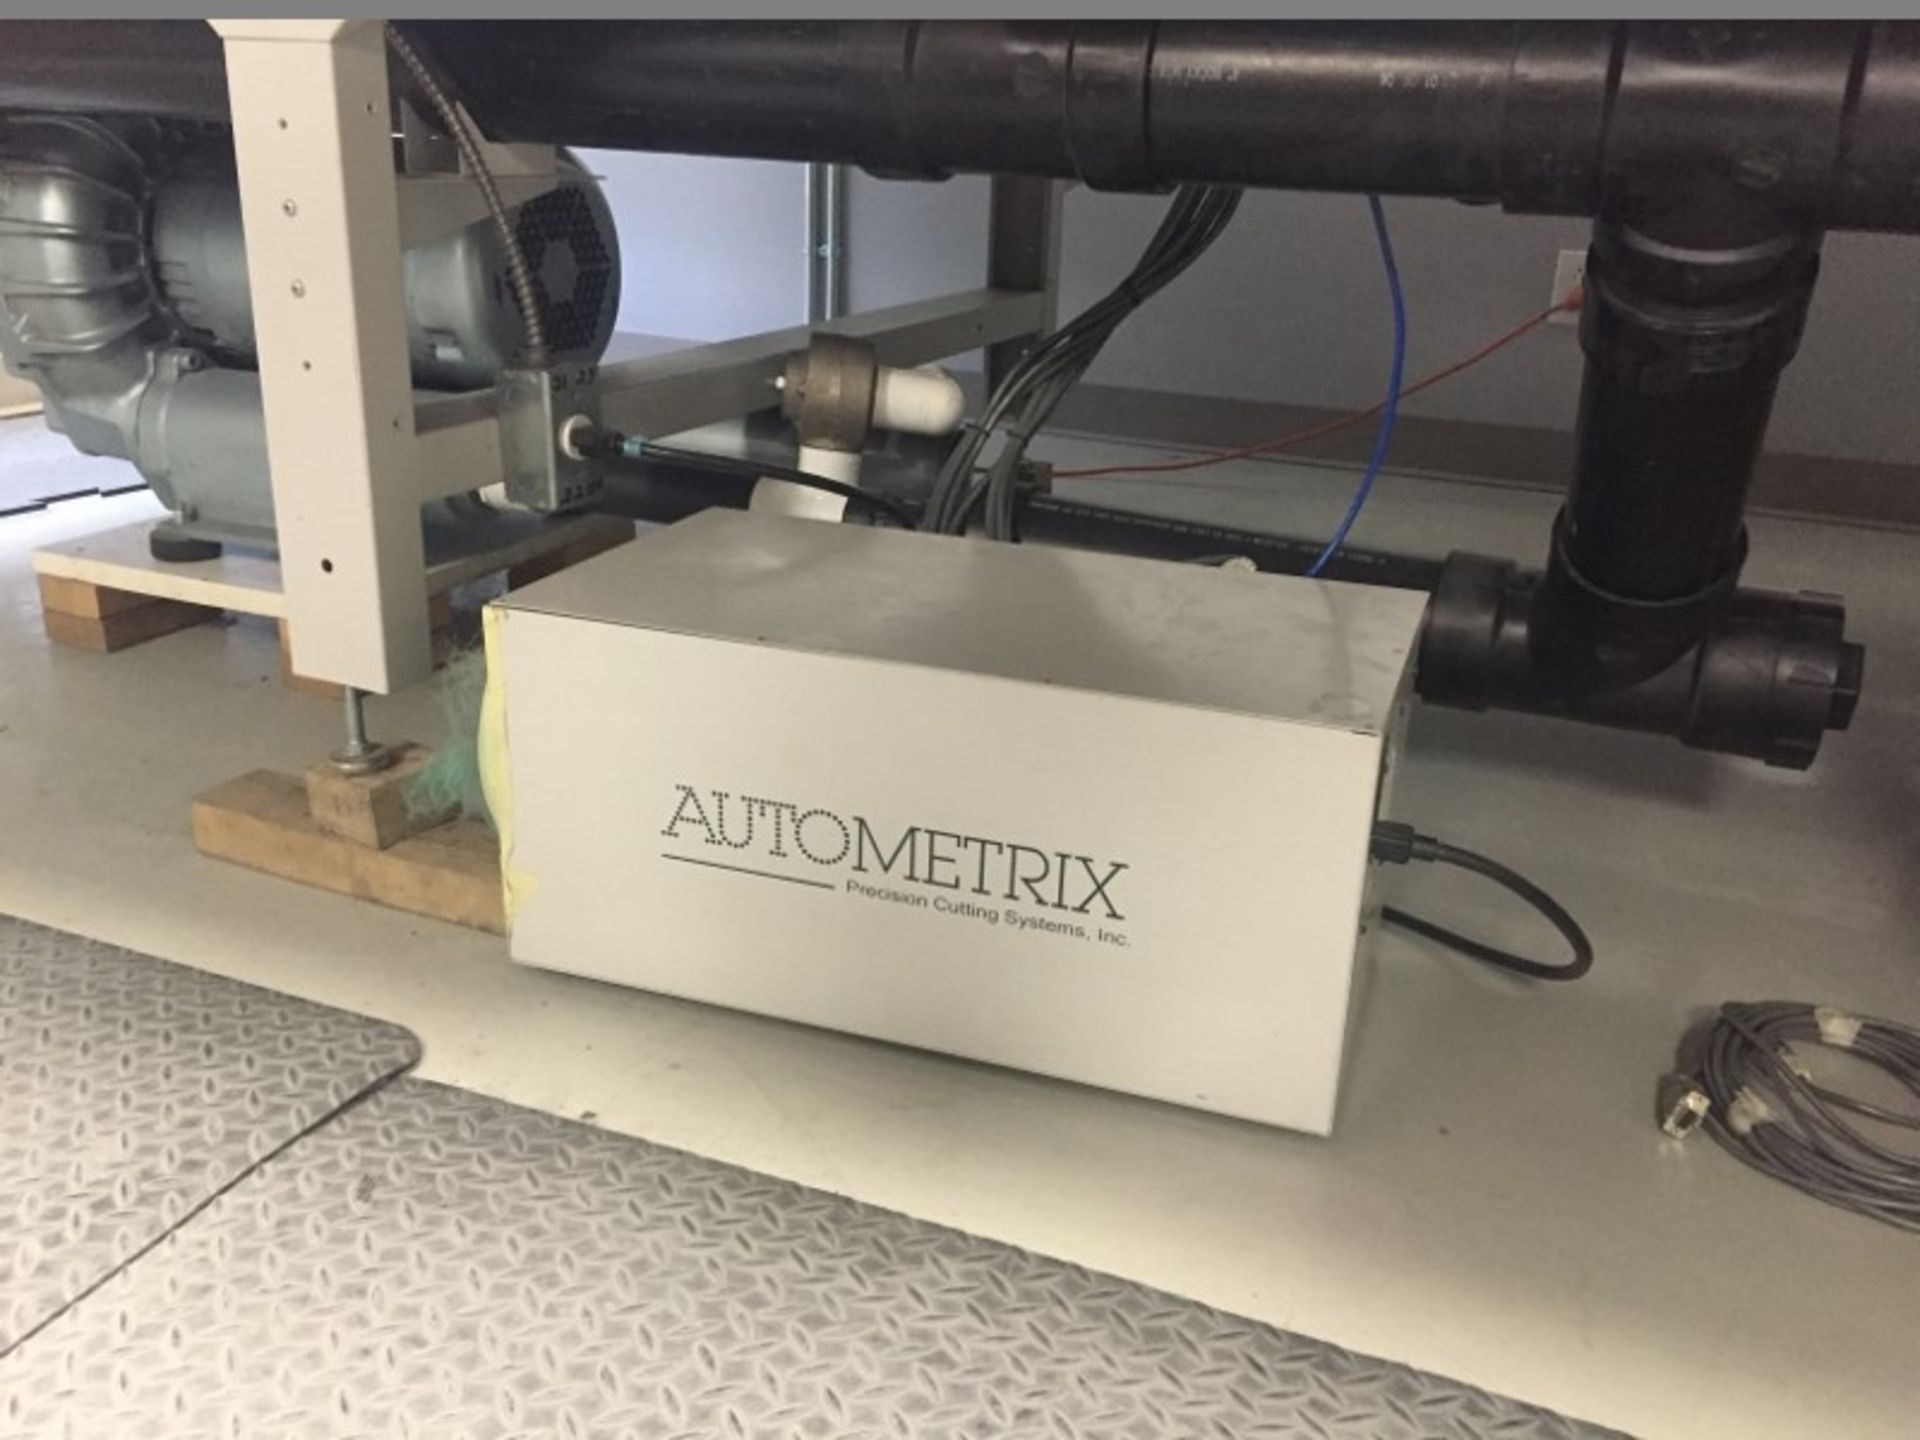 Autometrix precise cutting table w/suction 19"x145" - Image 3 of 6